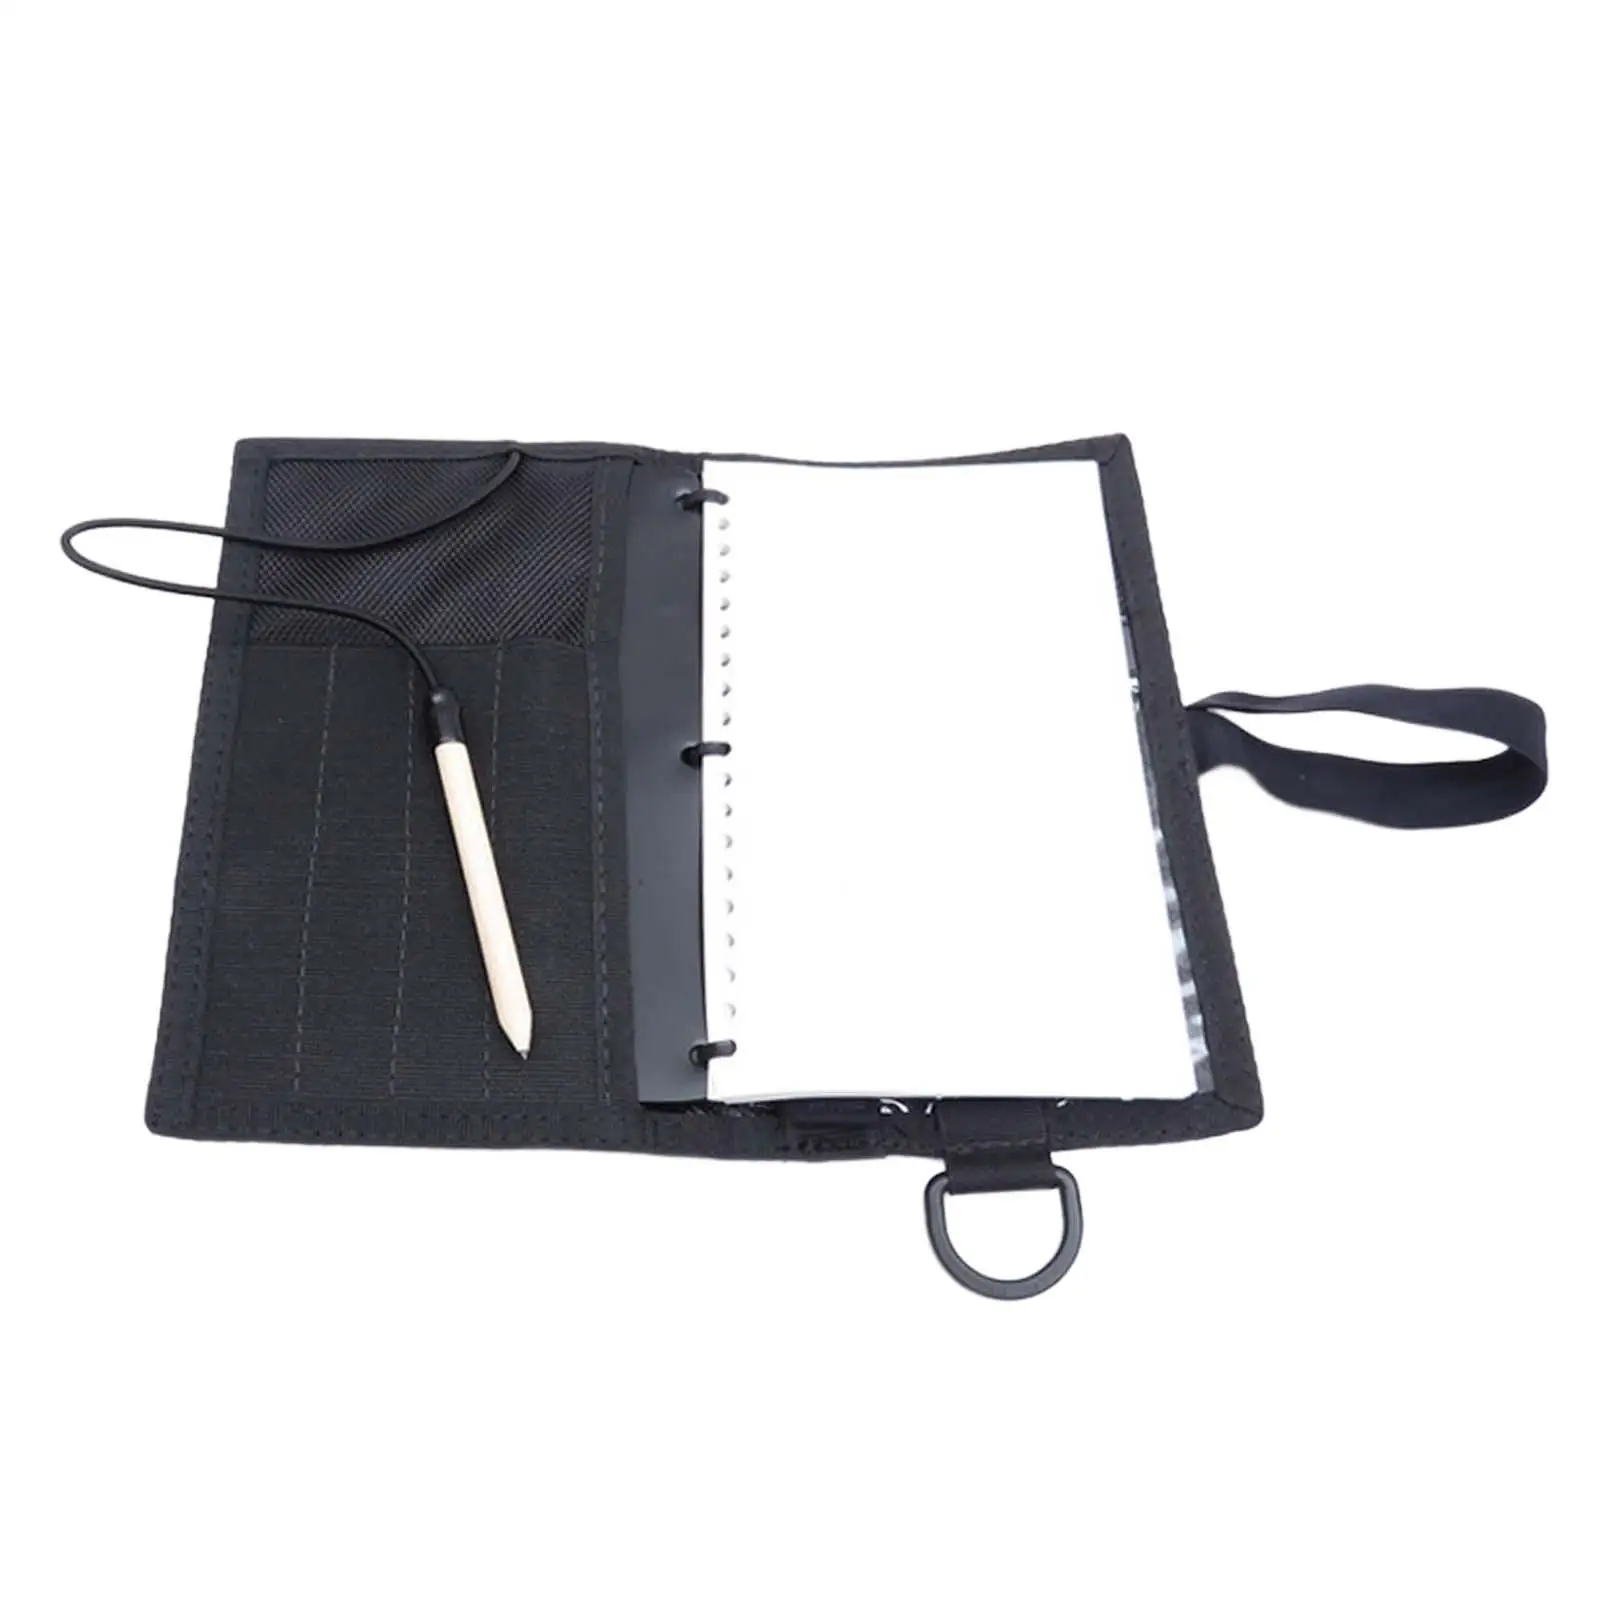 Underwater Writing Slate Diving Notebook Dive Writing Slate for Swimming Making Some Notes Underwater Men and Women Accessories